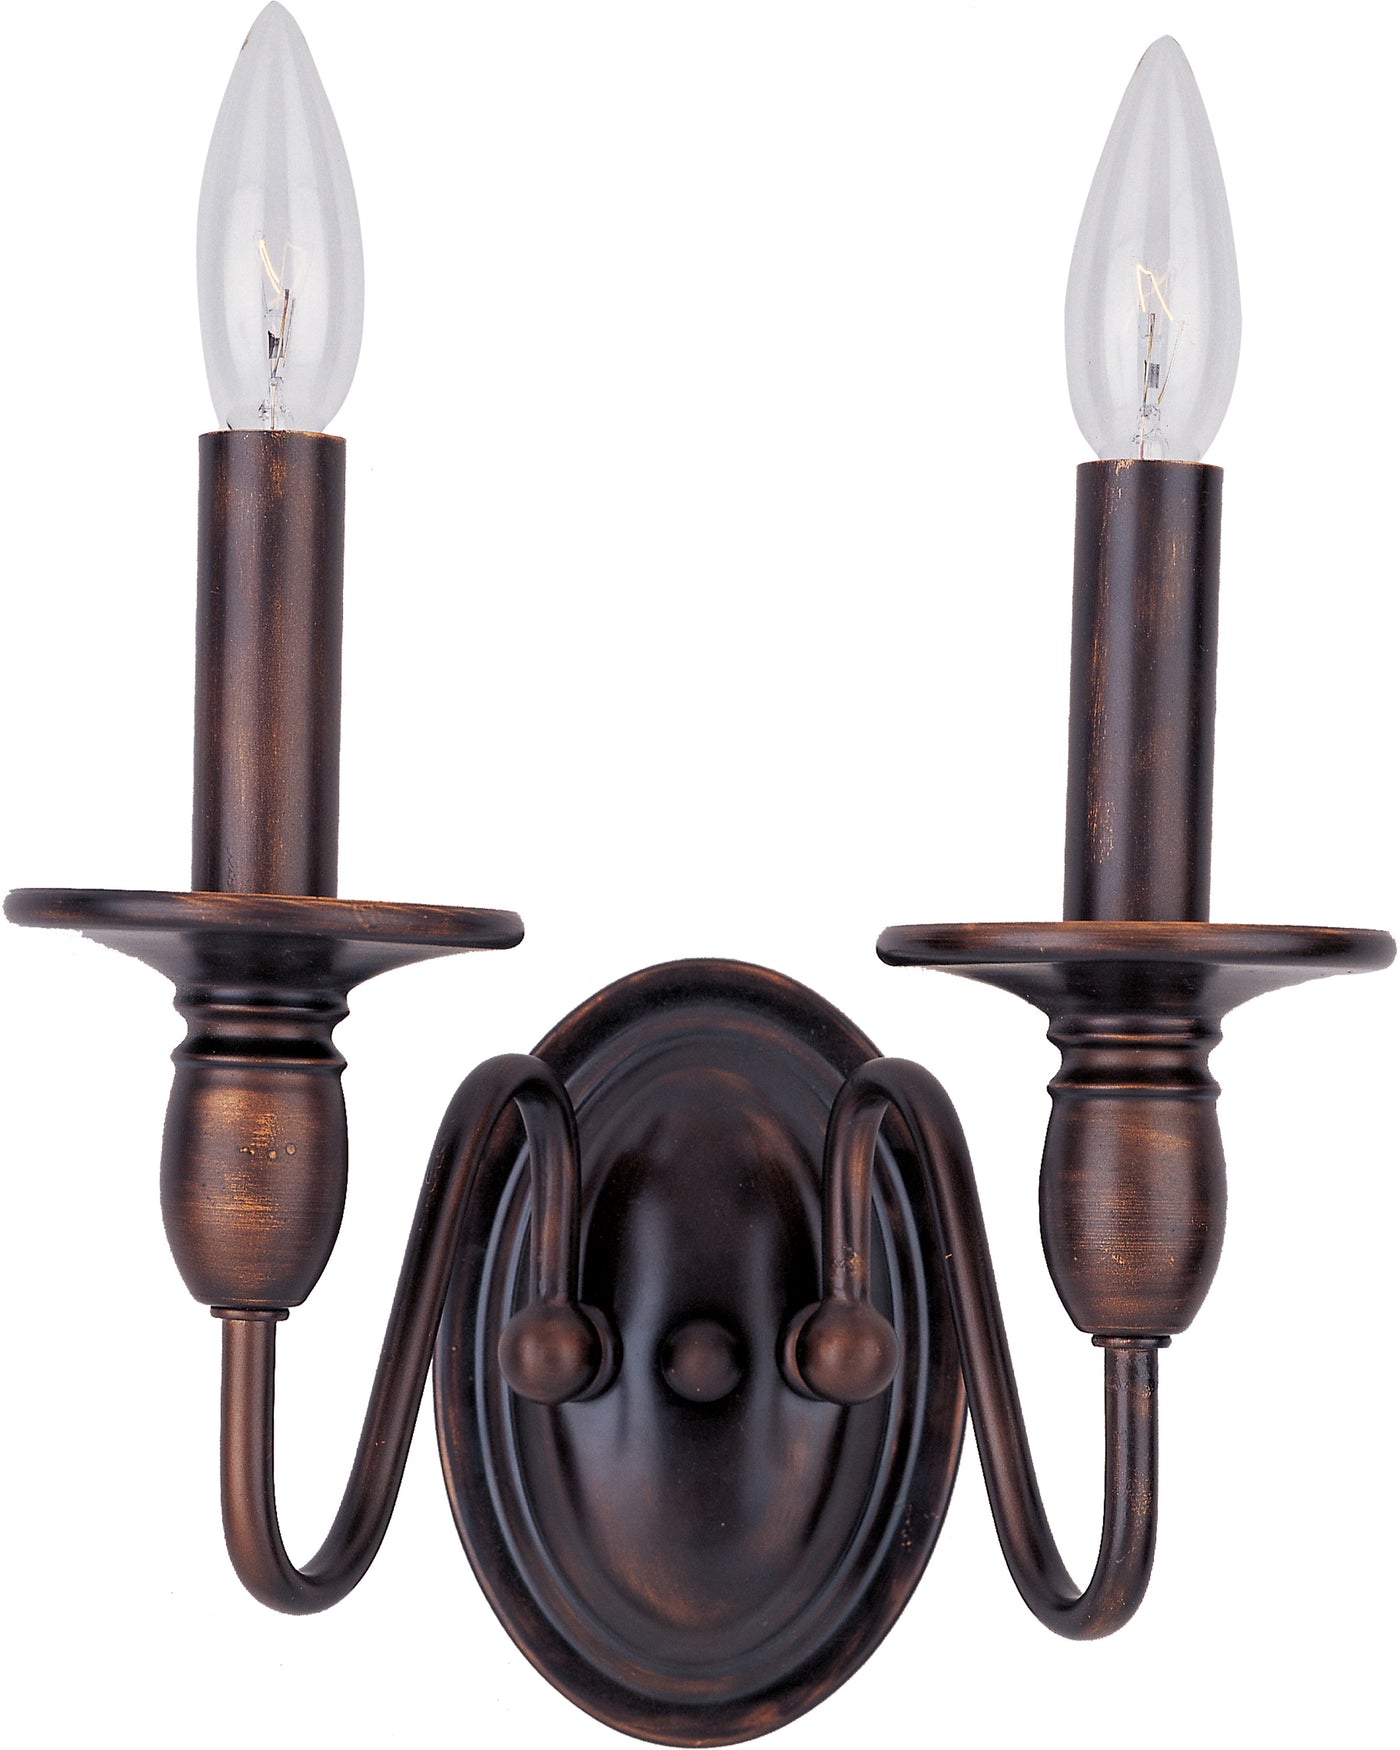 Towne 2-Light Wall Sconce